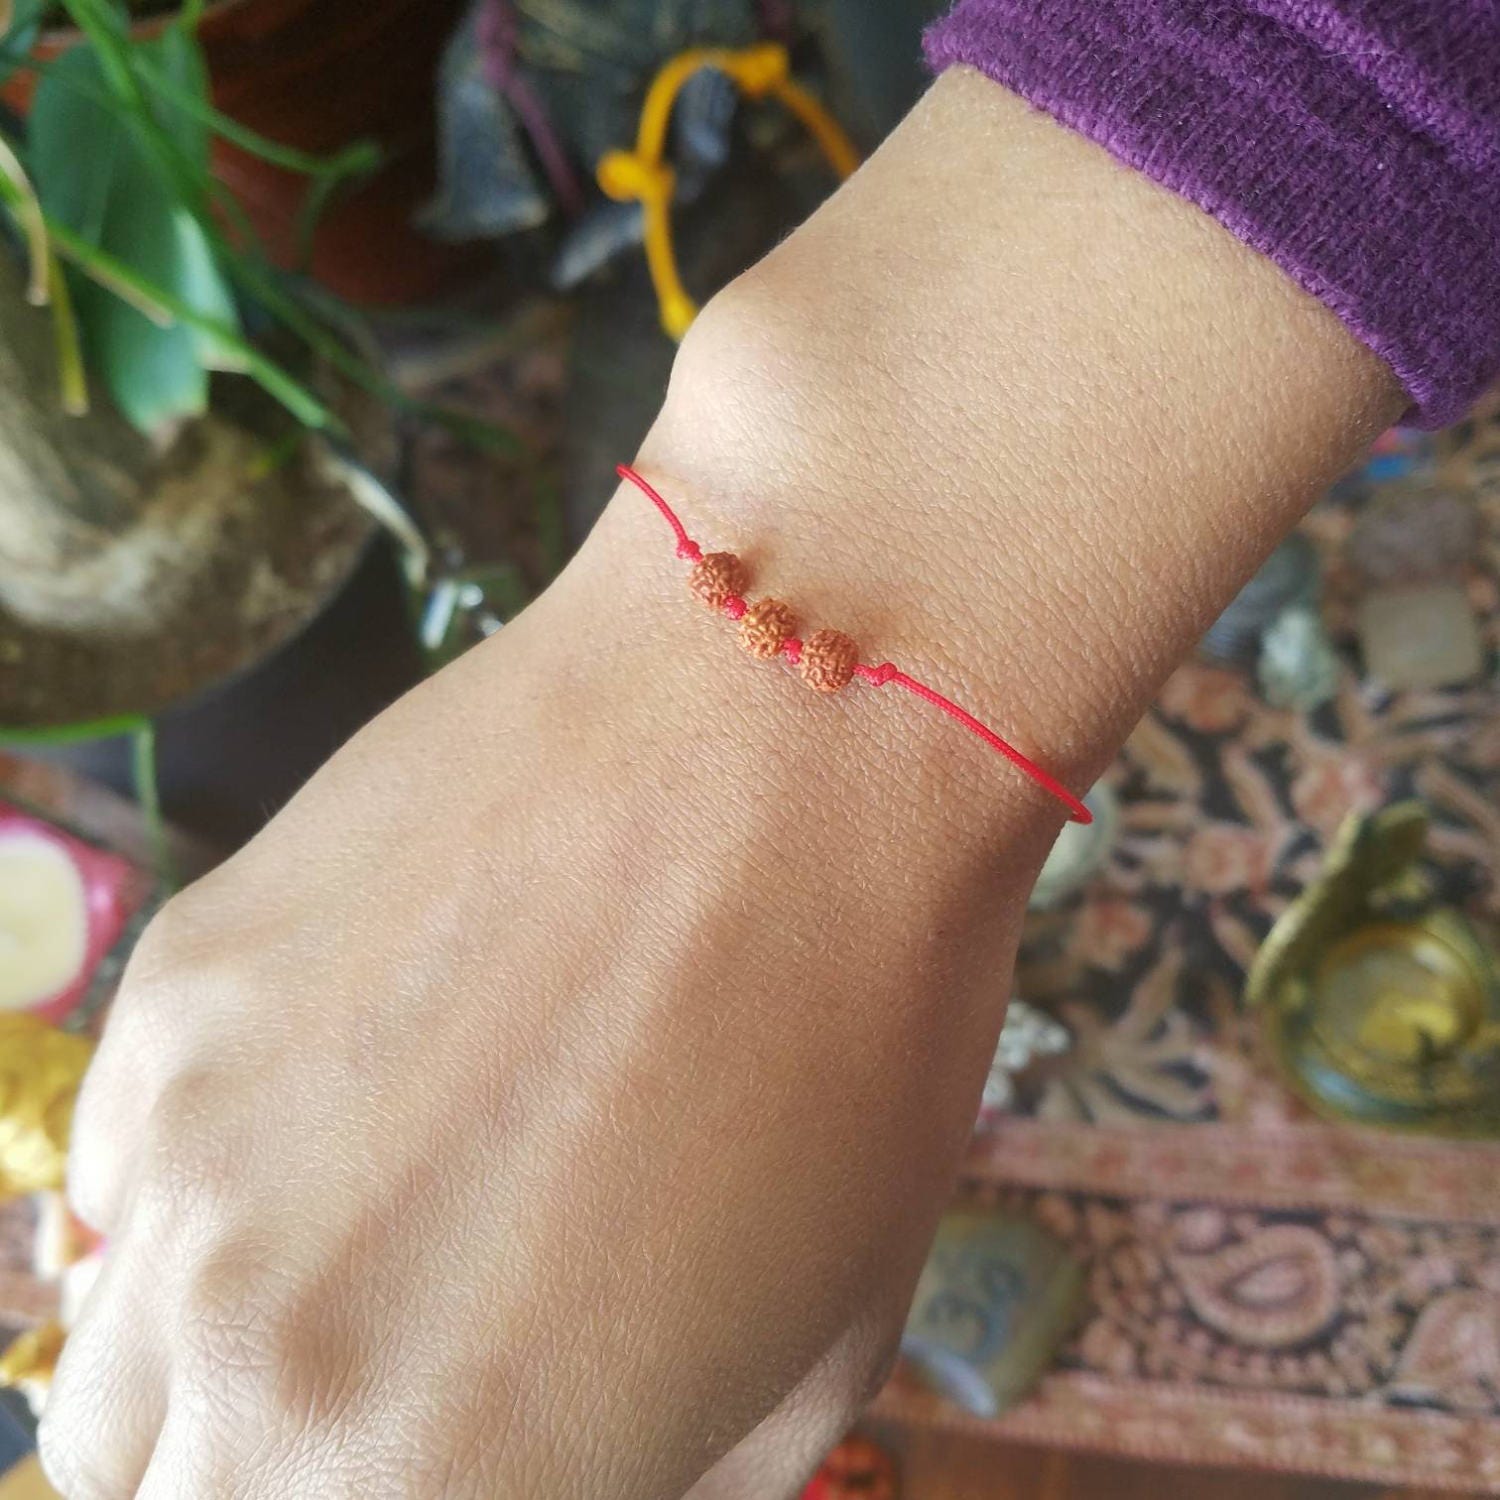 Buy Evil Eye Red Bracelets for Protection - Red String Amulet Adjustable  Bracelet For Women Men | Girls Link Knot Lucky Kabbalah Protection Bracelets,  9 inch, red rope, metal at Amazon.in